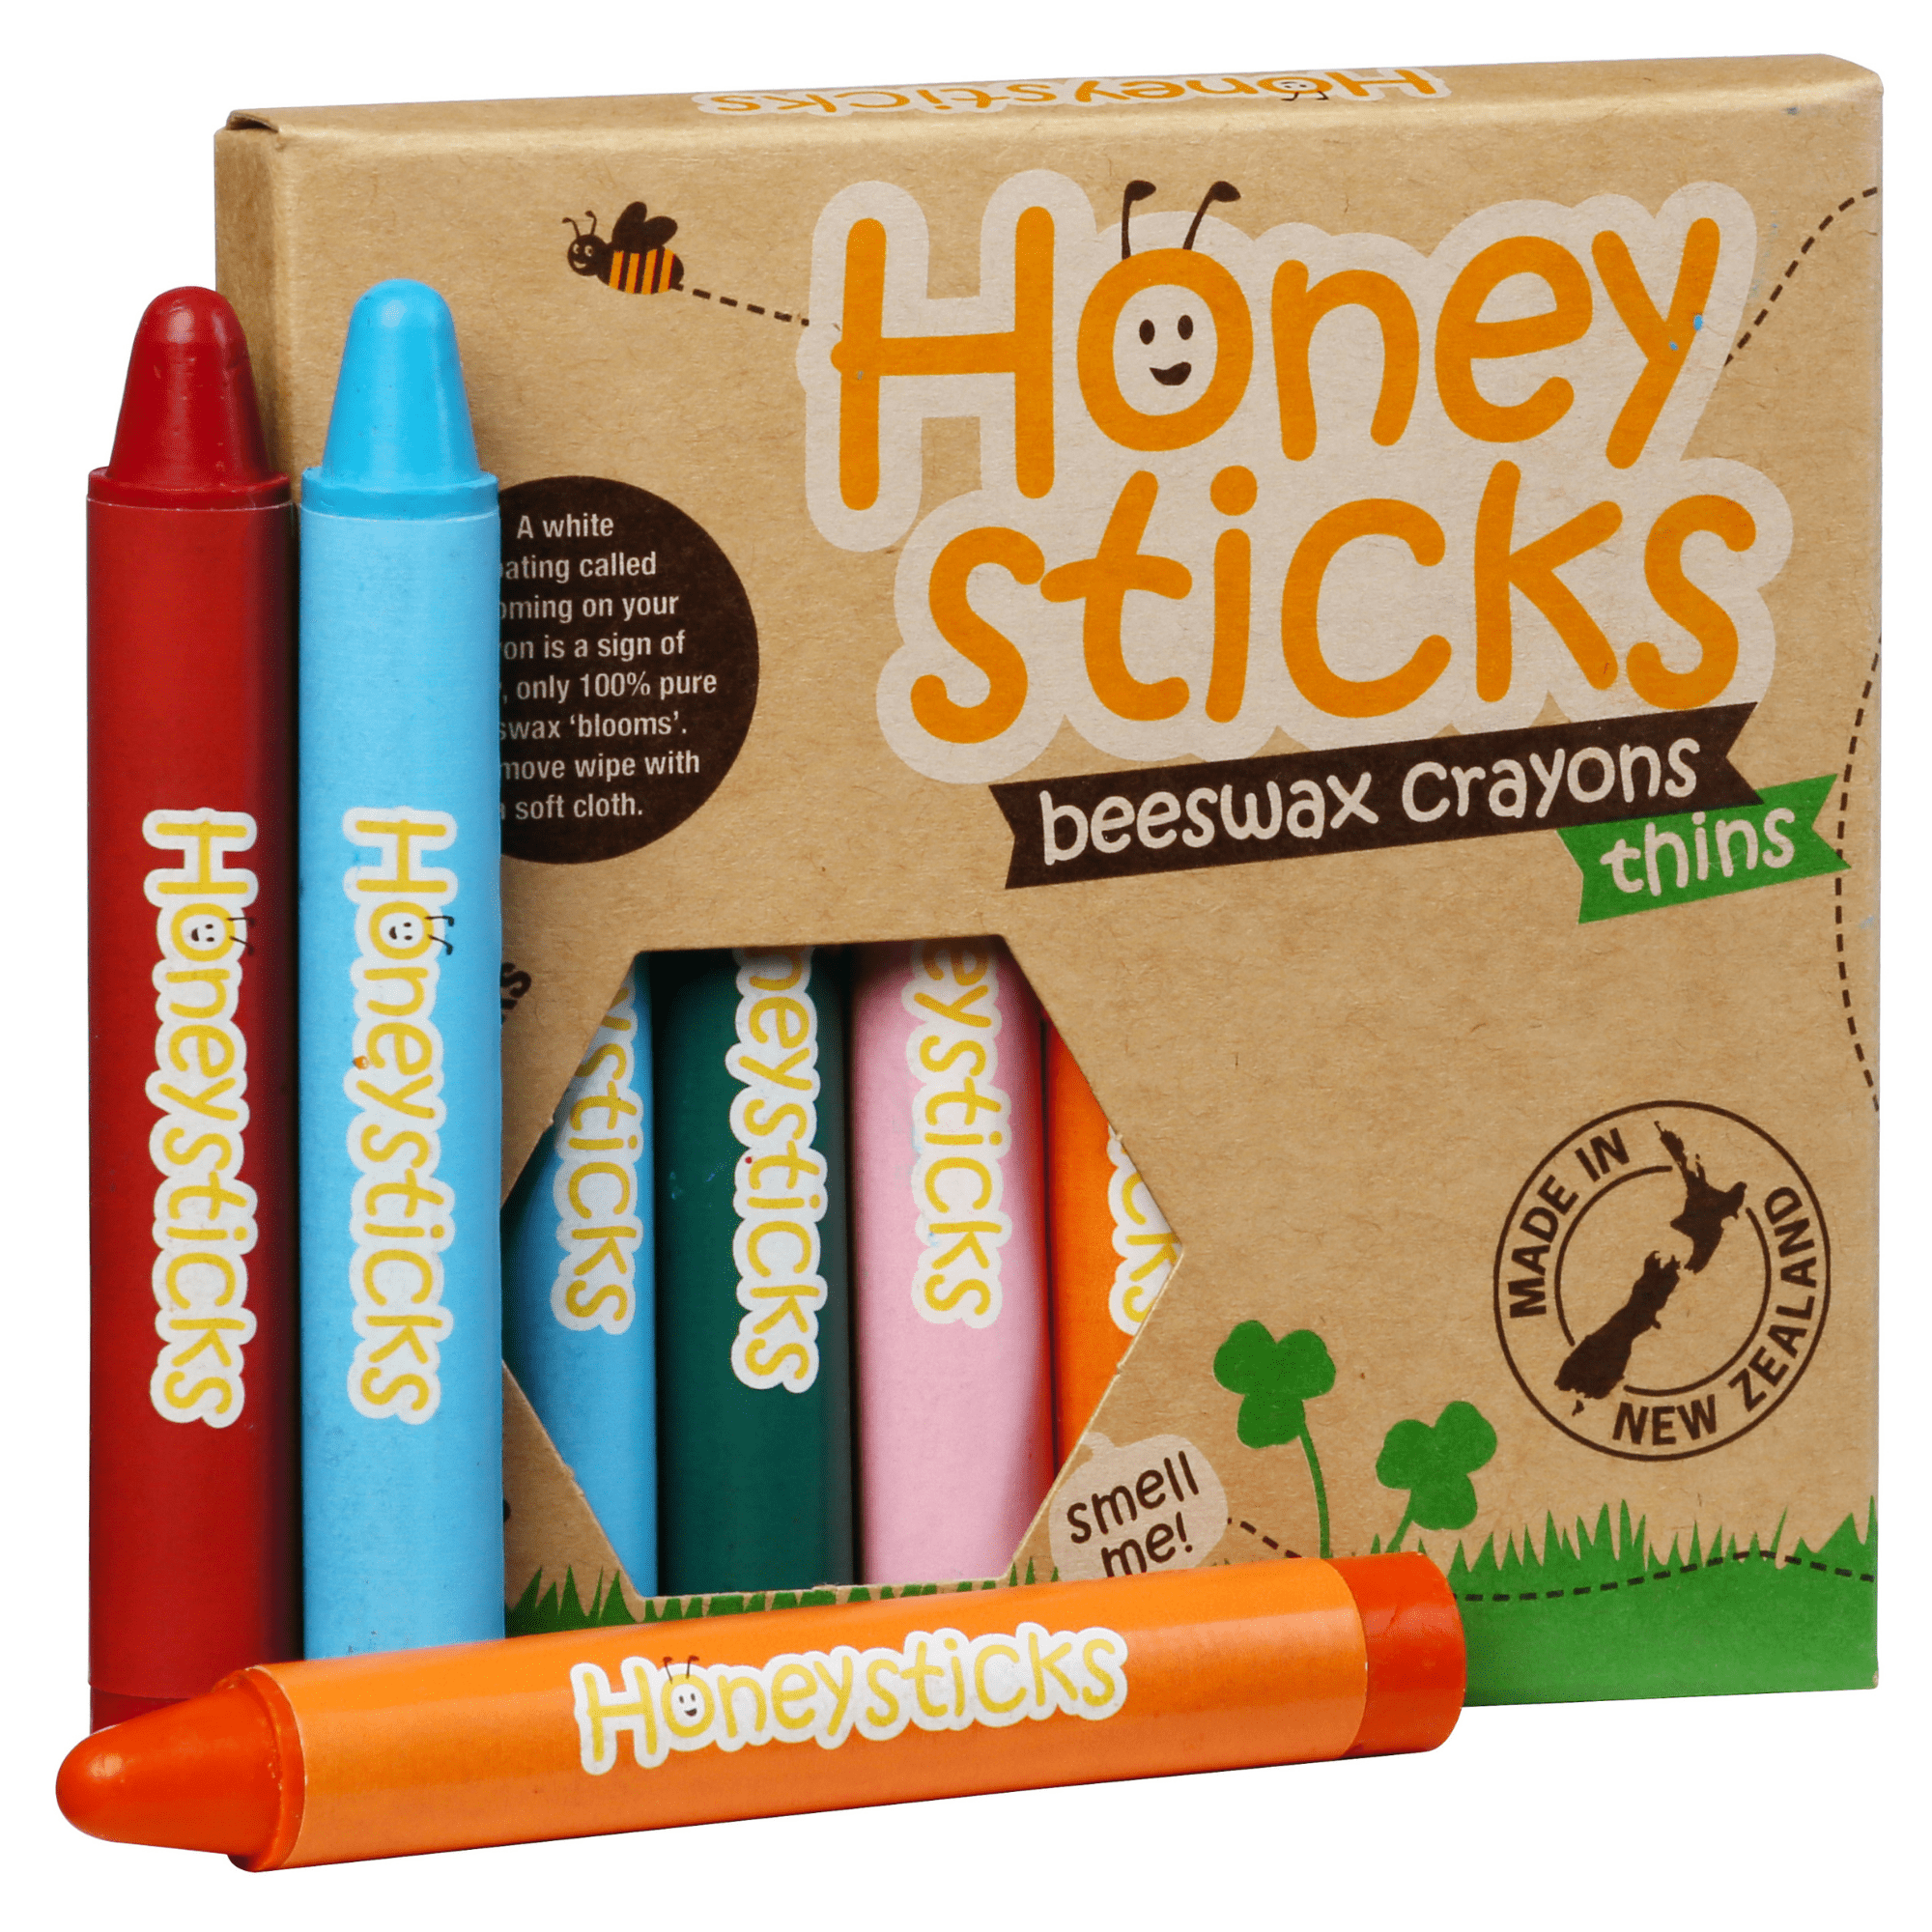 Honeysticks 100% Pure Beeswax Crayons - Jumbo Crayons for Toddlers, Kids -  Non Toxic, Food Grade Colours, Sustainably Made in New Zealand - Large Size  is Easy to Hold and Use 